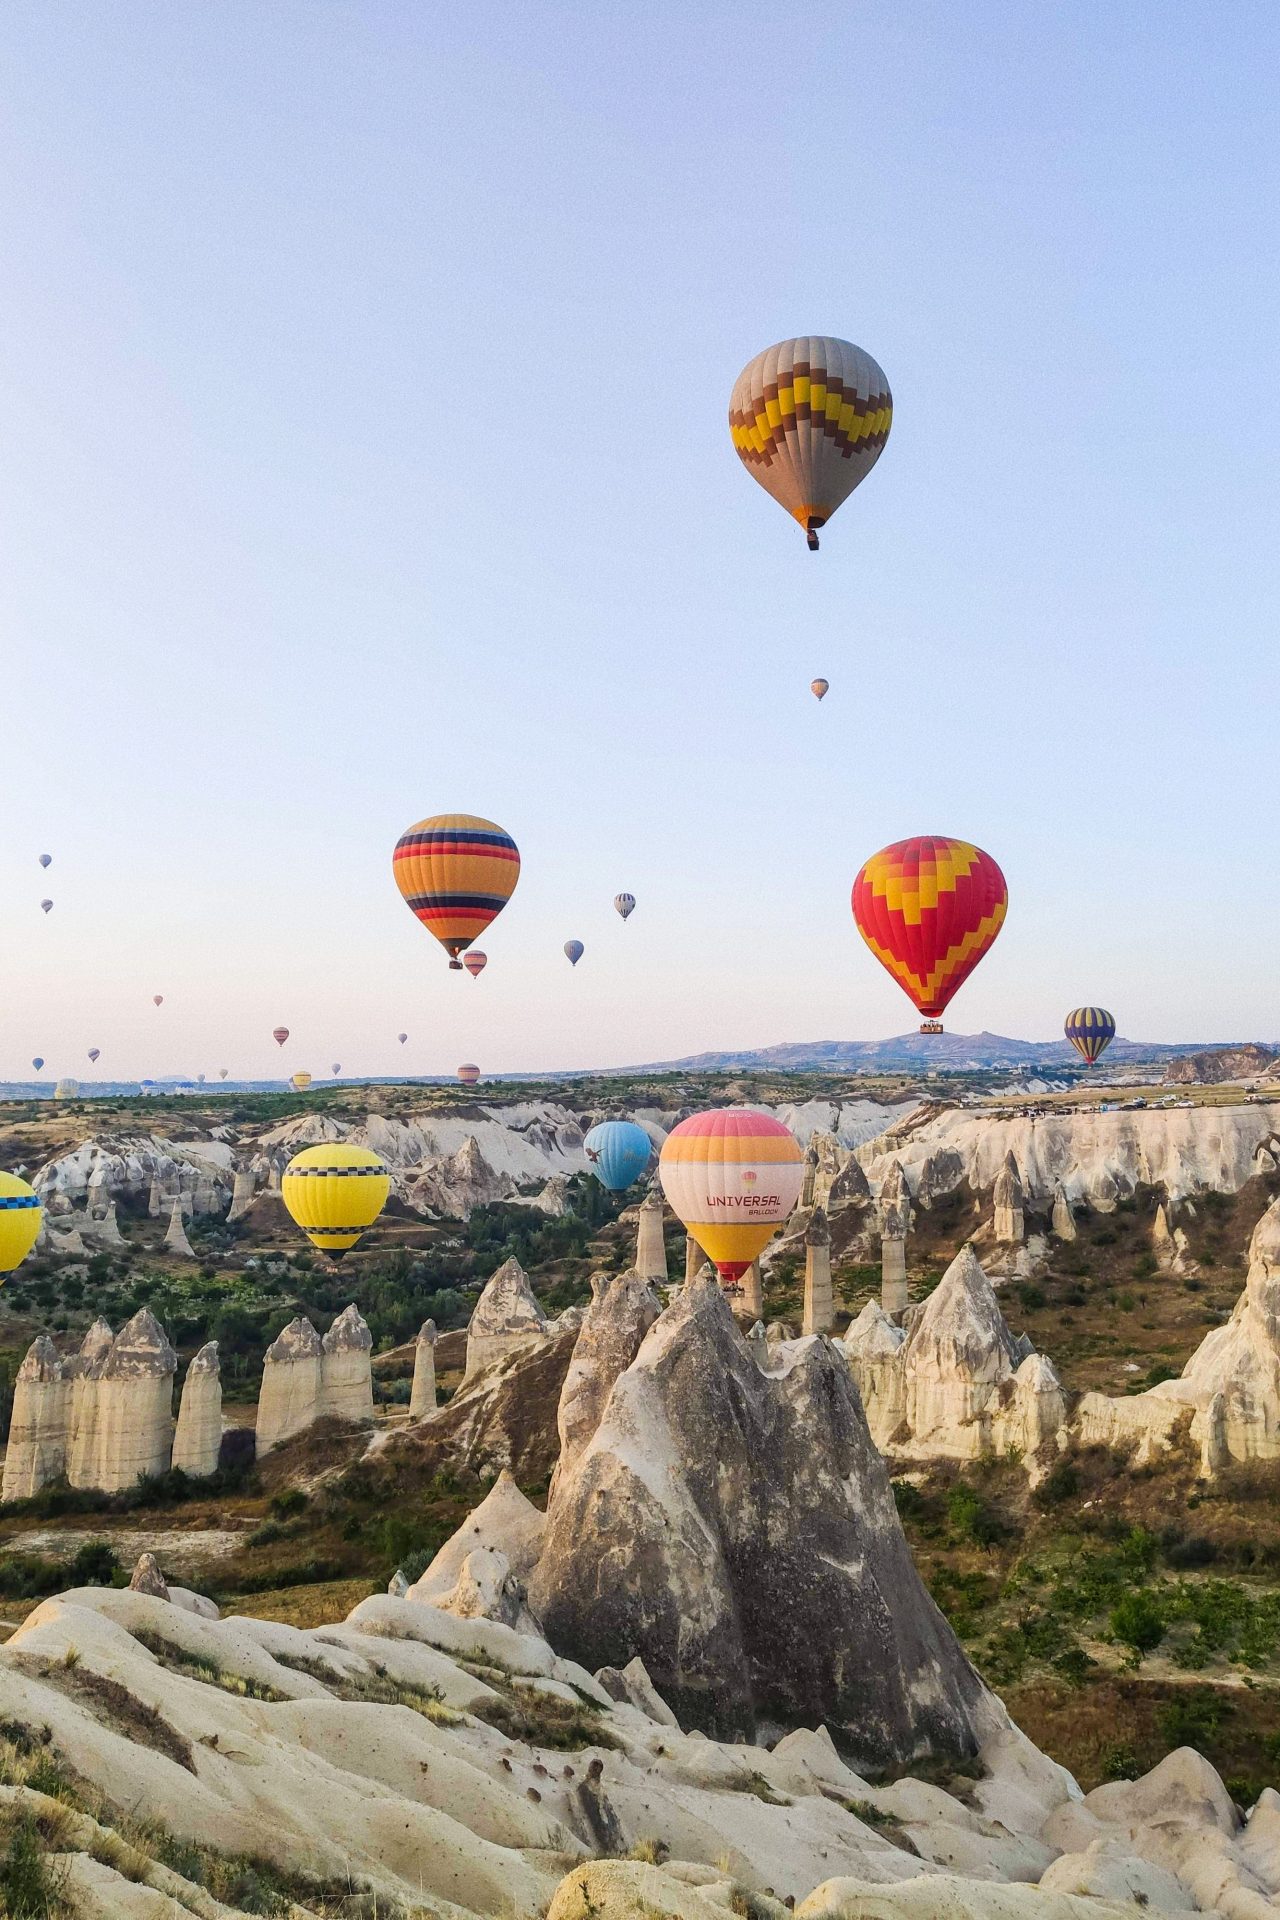 <p>This balloon ride will allow you to see this magnificent landscape from the sky. A luxury experience that is completed with a "Champagne Breakfast".</p> <p>Image: Slobodan Špijunović - Unsplash</p>